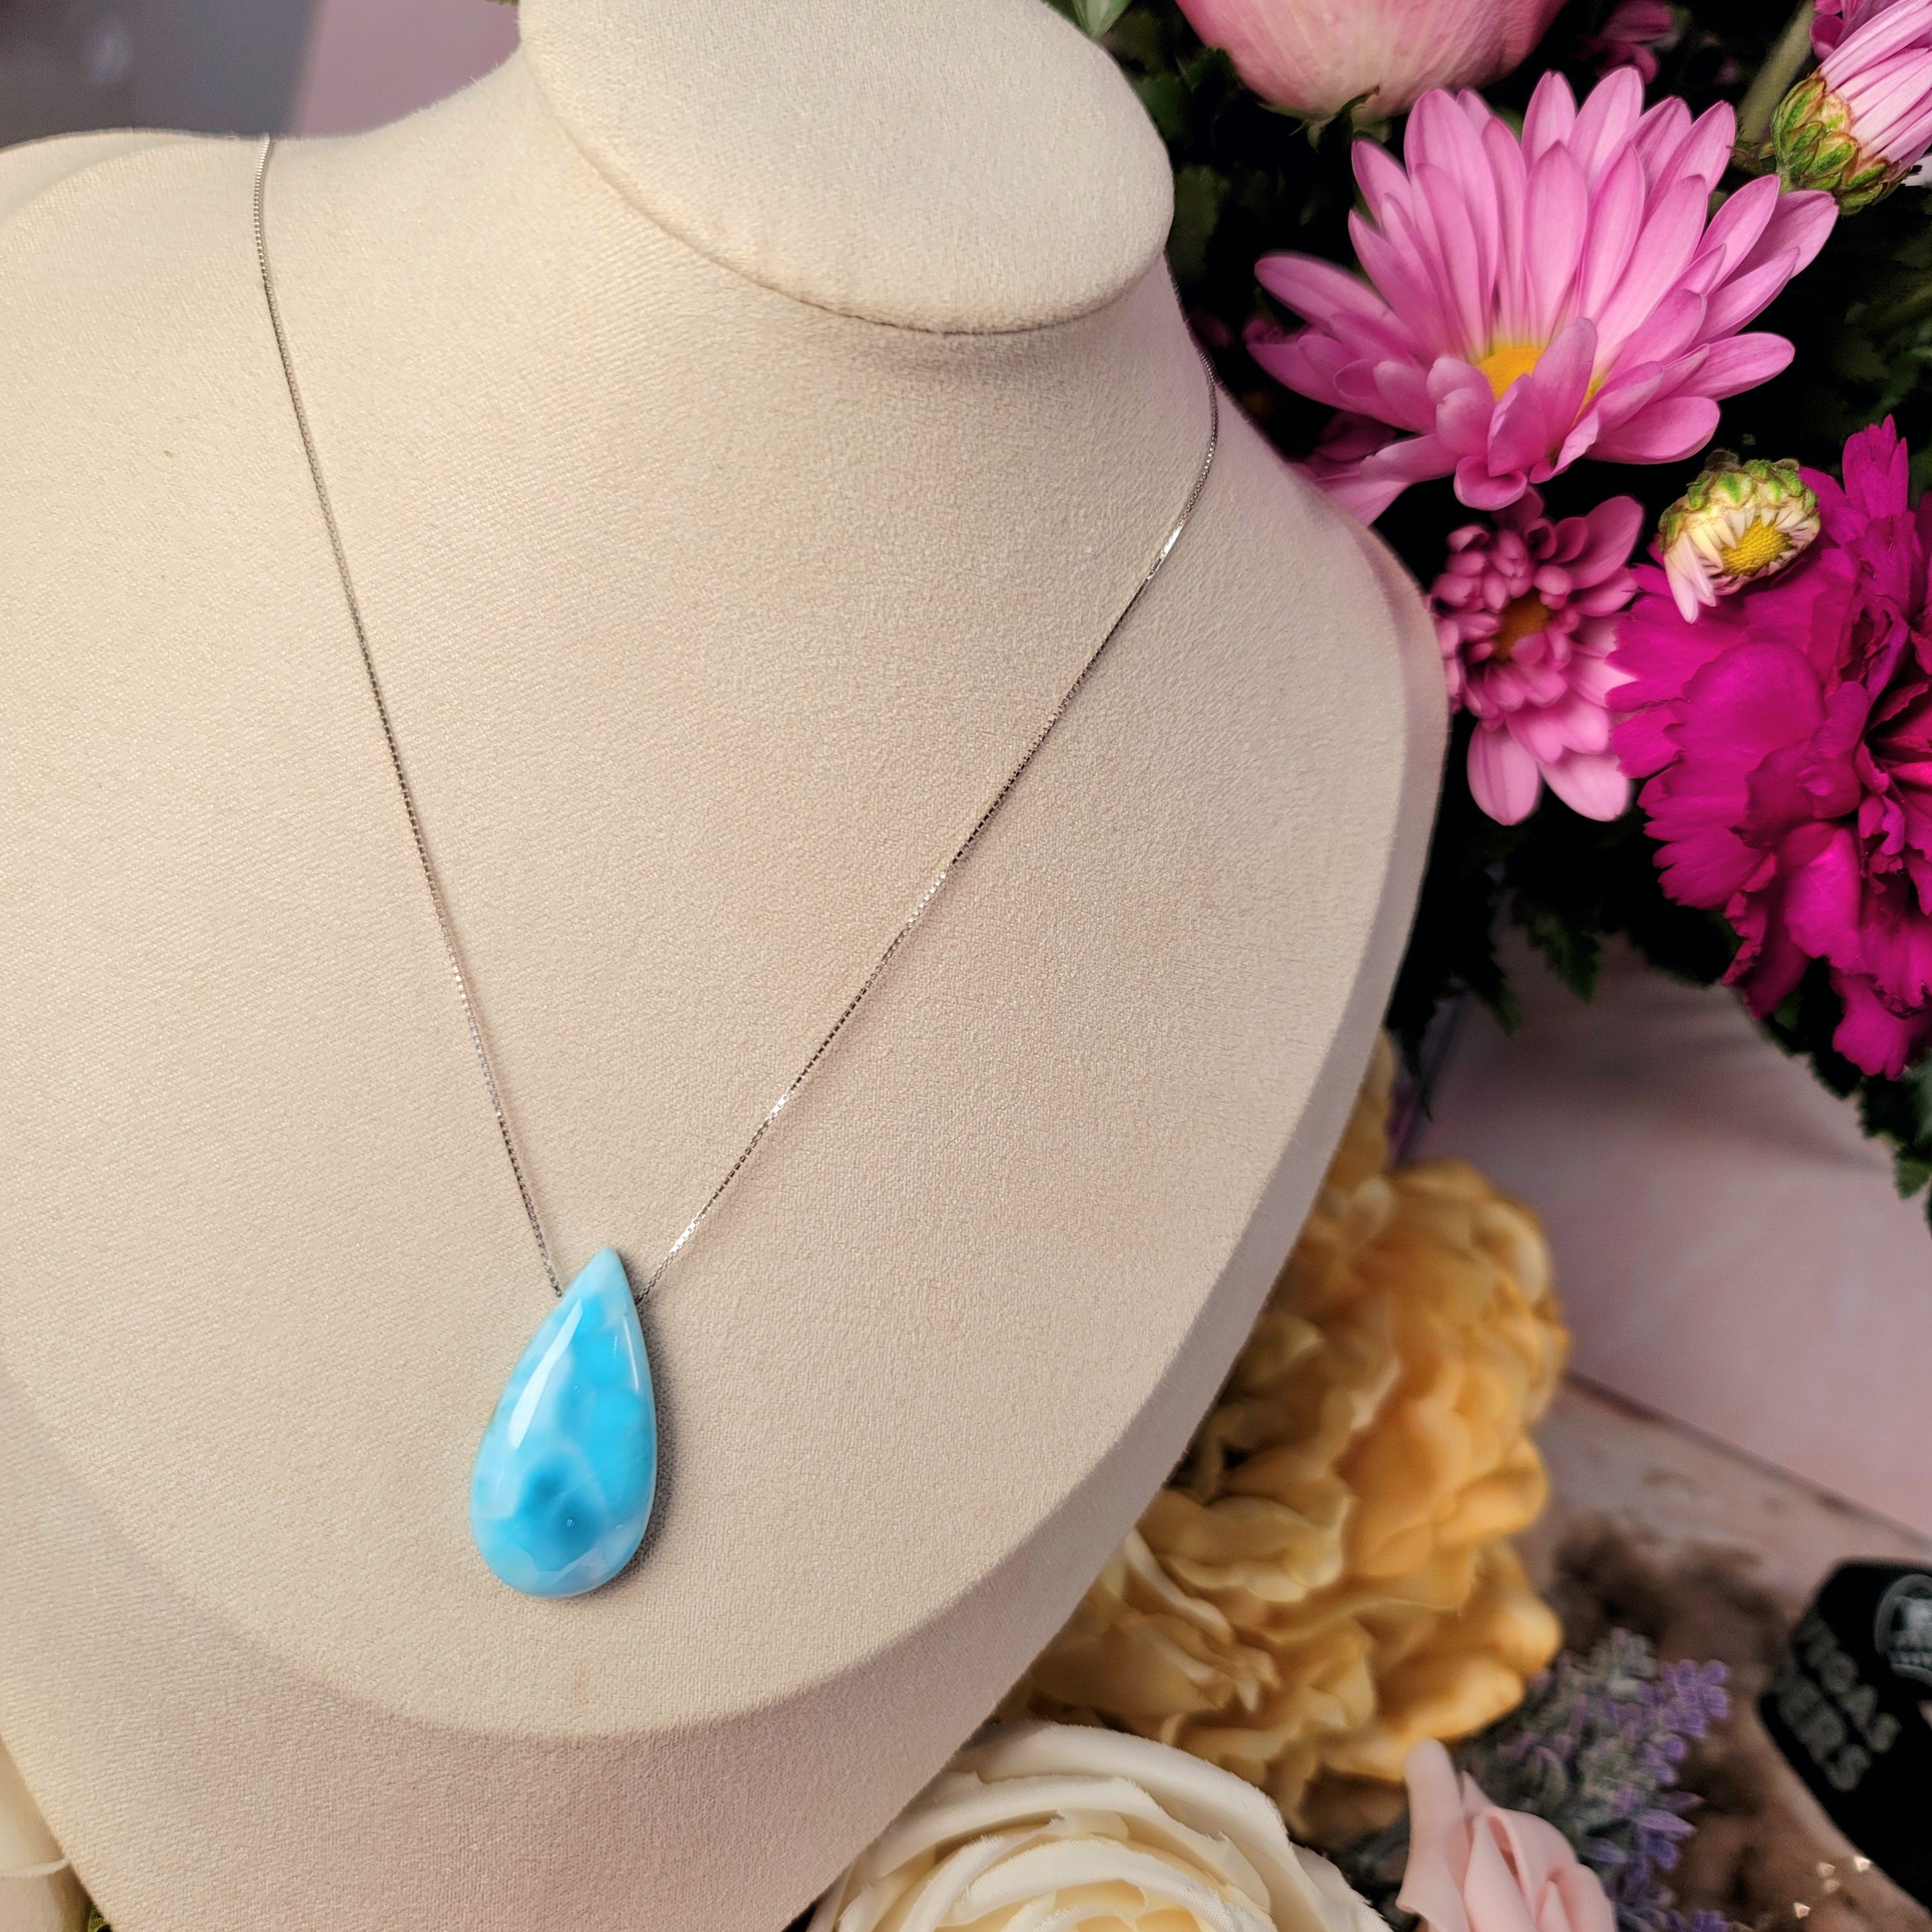 Larimar Teardrop Carved Necklace .925. Silver for Manifesting your Higher Purpose